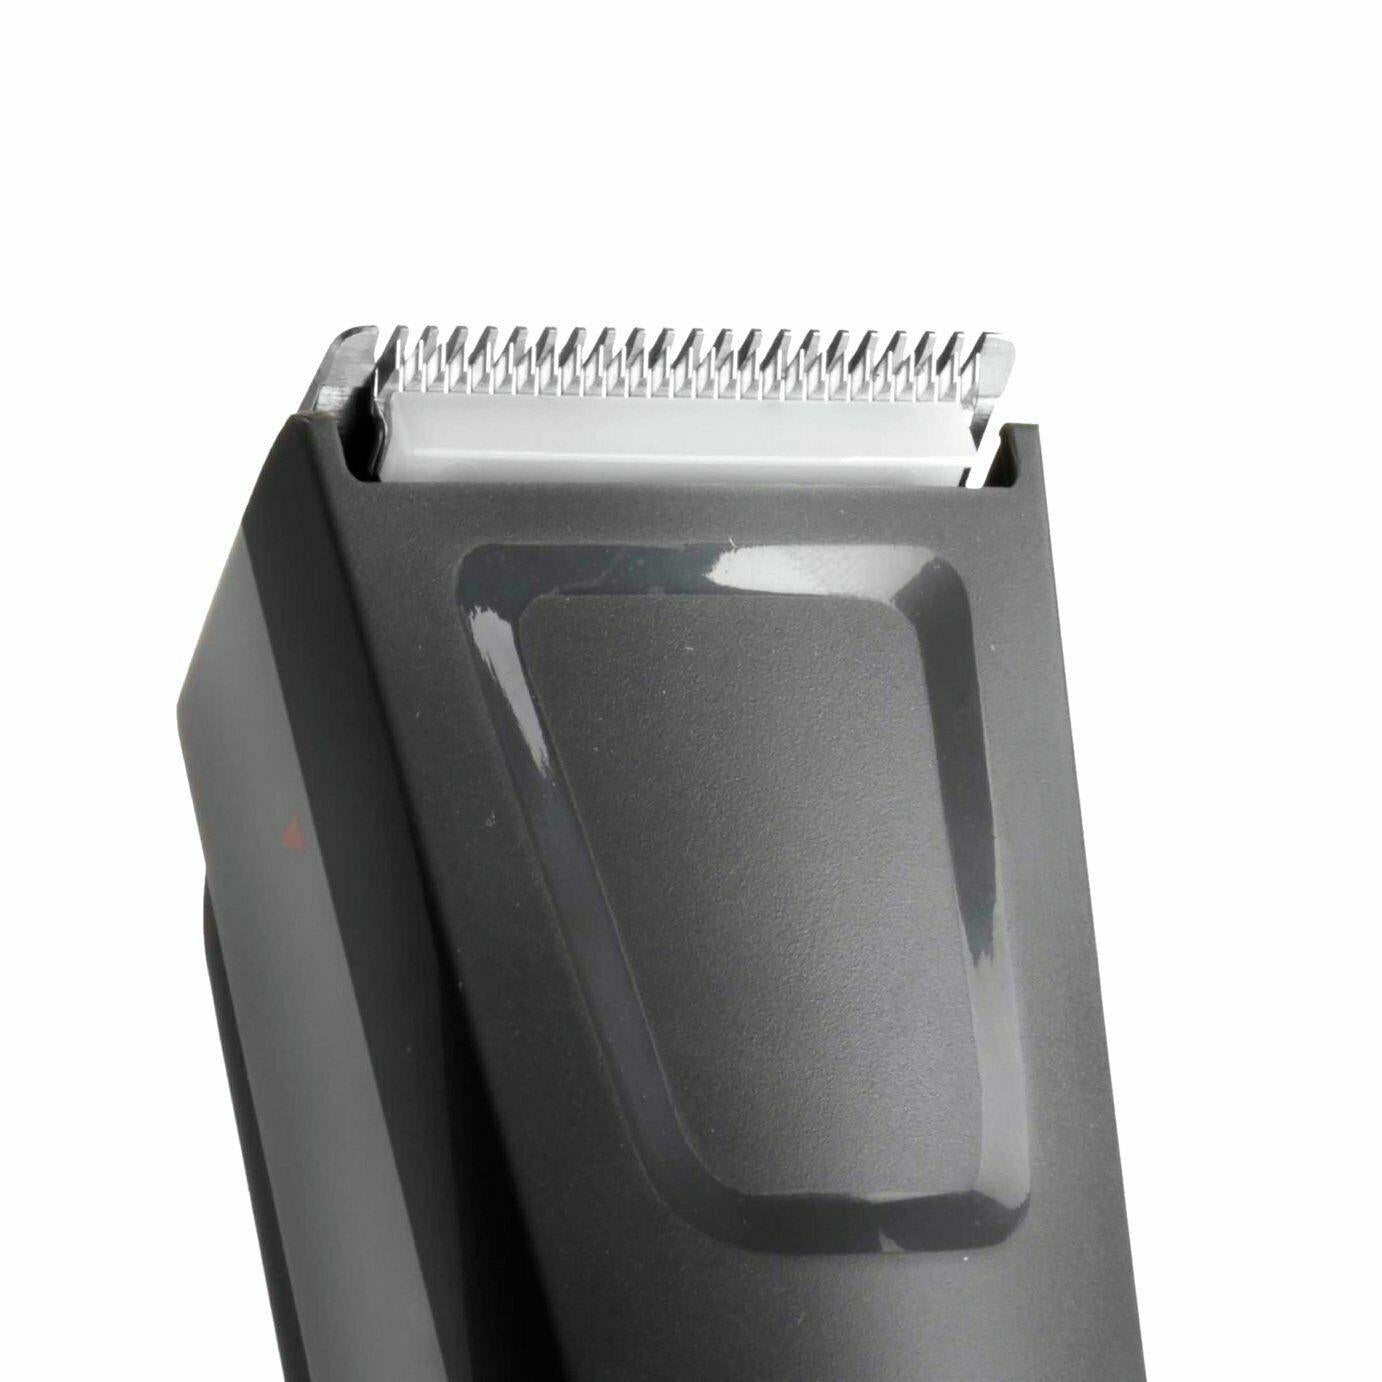 Babyliss Hair Clippers Precision Cut Cordless Hair Clipper with 5 Accessories - 7756U